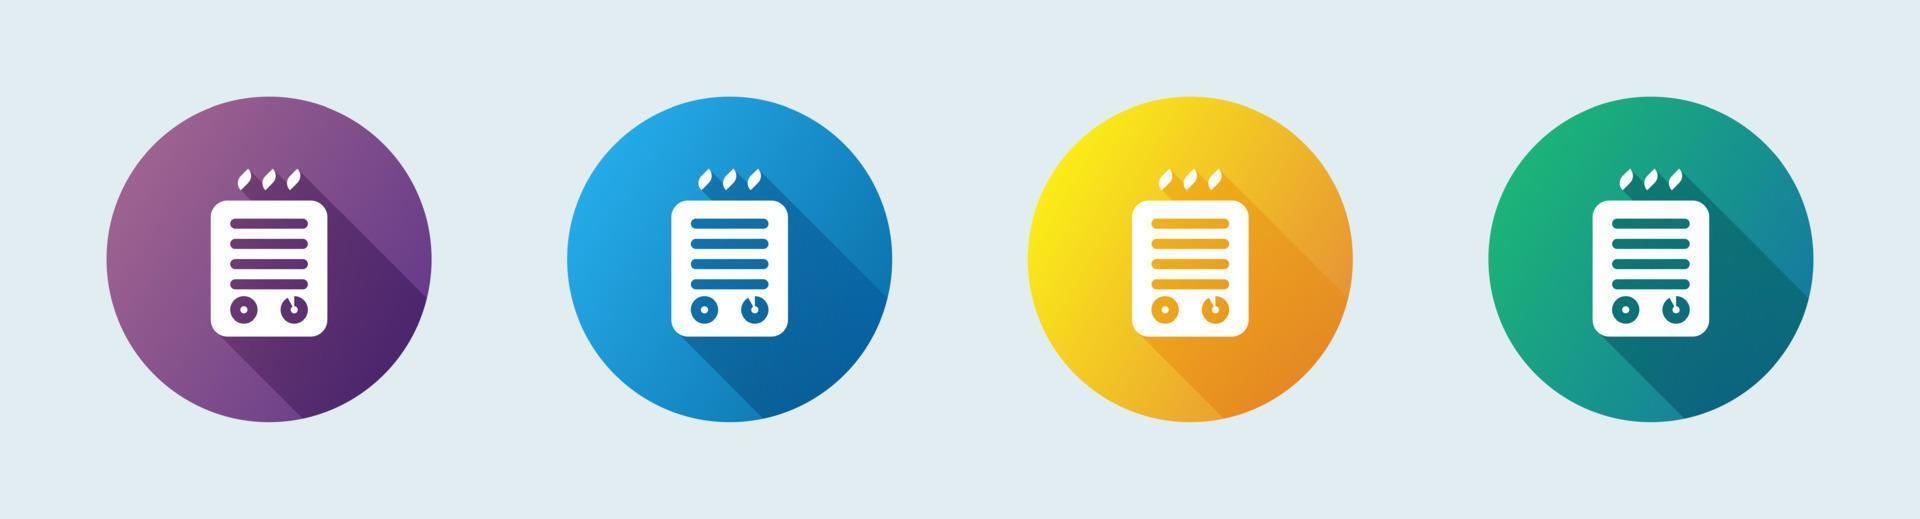 Heater solid icon in flat design style. Warm system signs vector illustration.